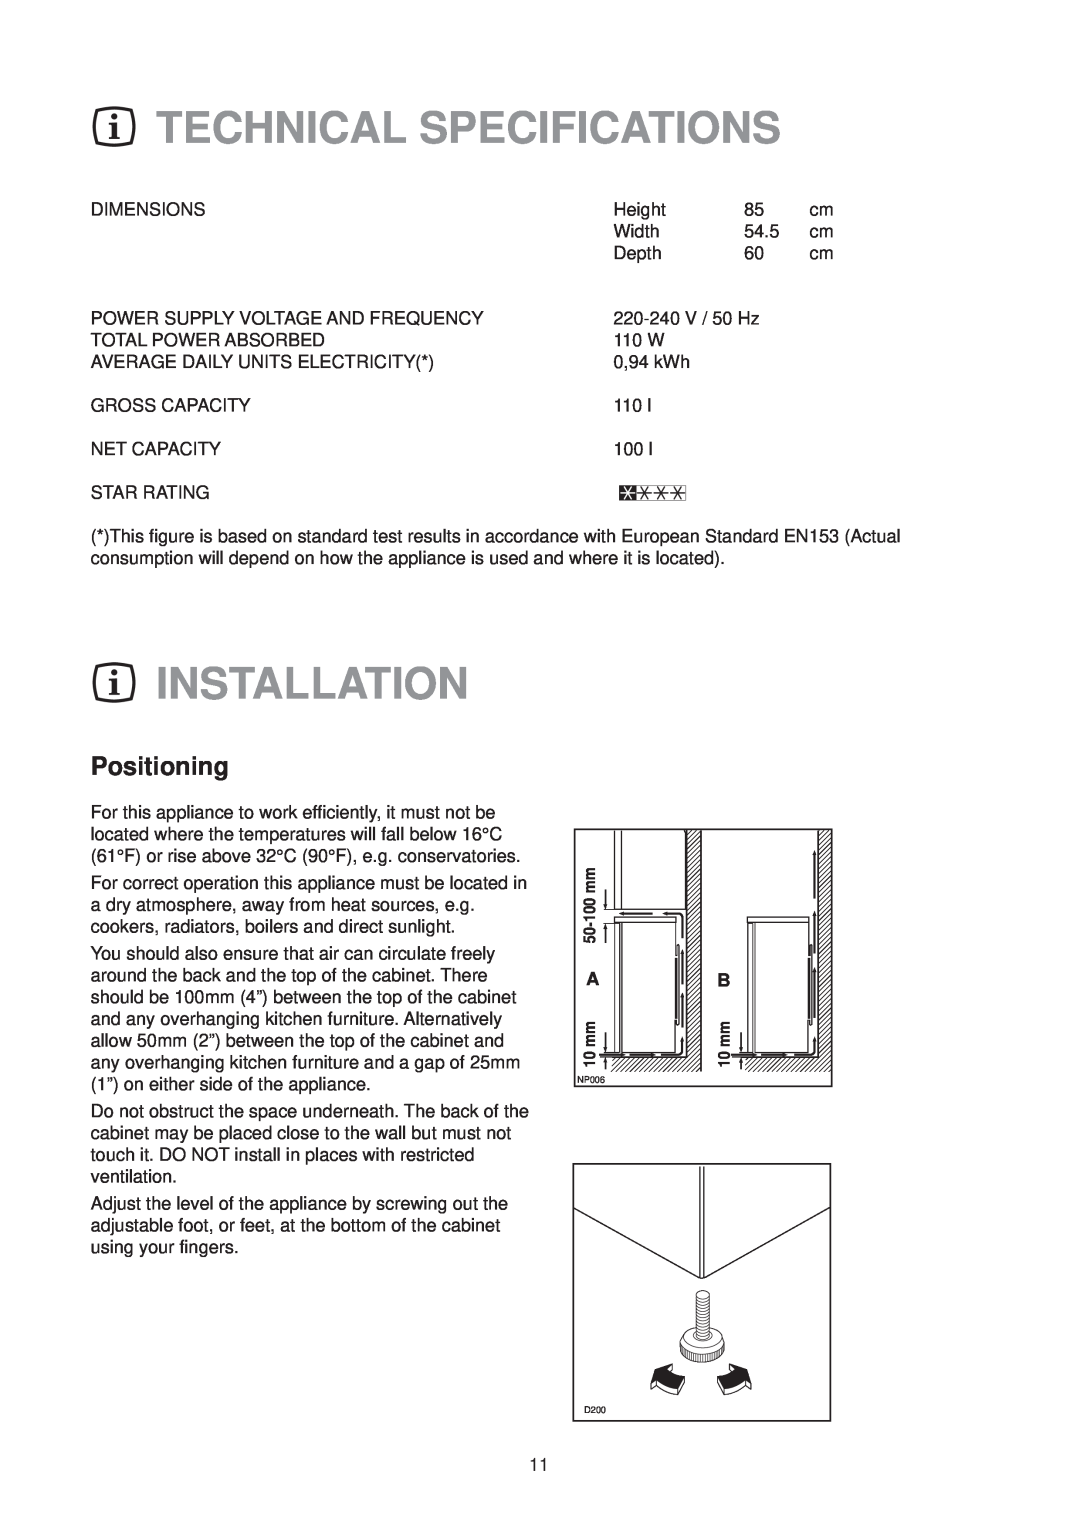 Electrolux EU 1322 T manual Technical Specifications, Installation, Positioning 